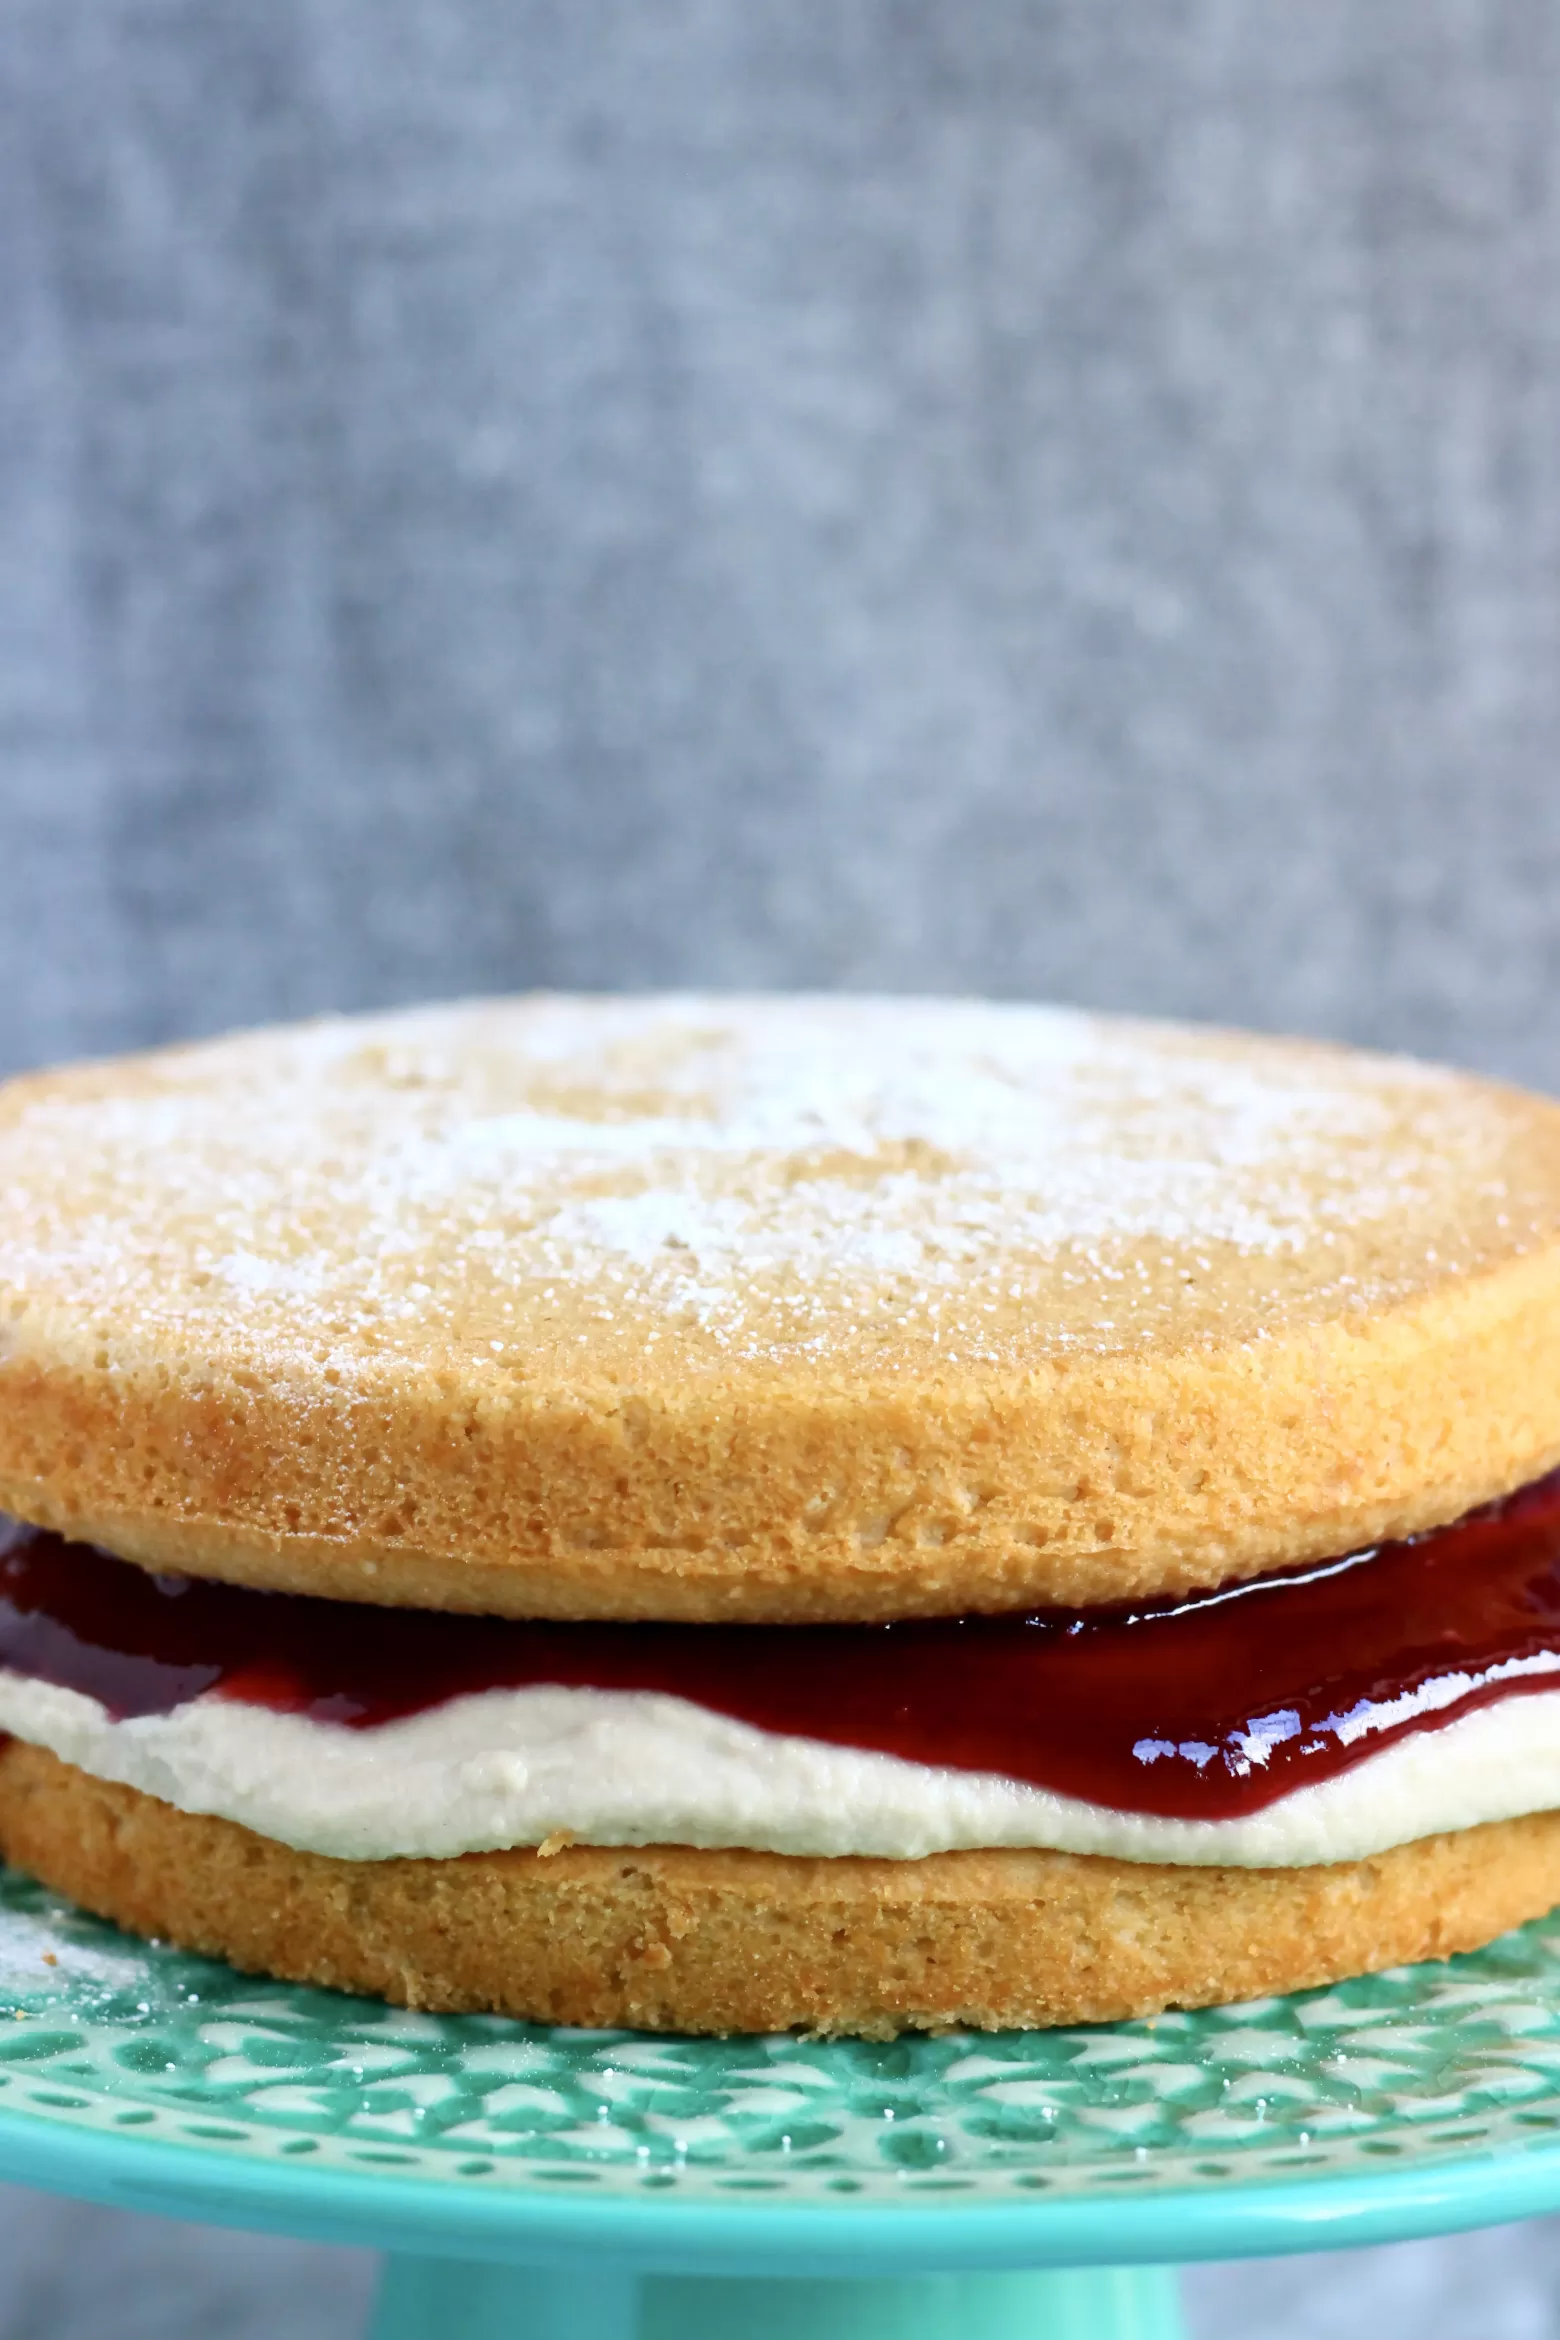 A gluten-free vegan Victoria sponge cake with buttercream and jam on a cake stand